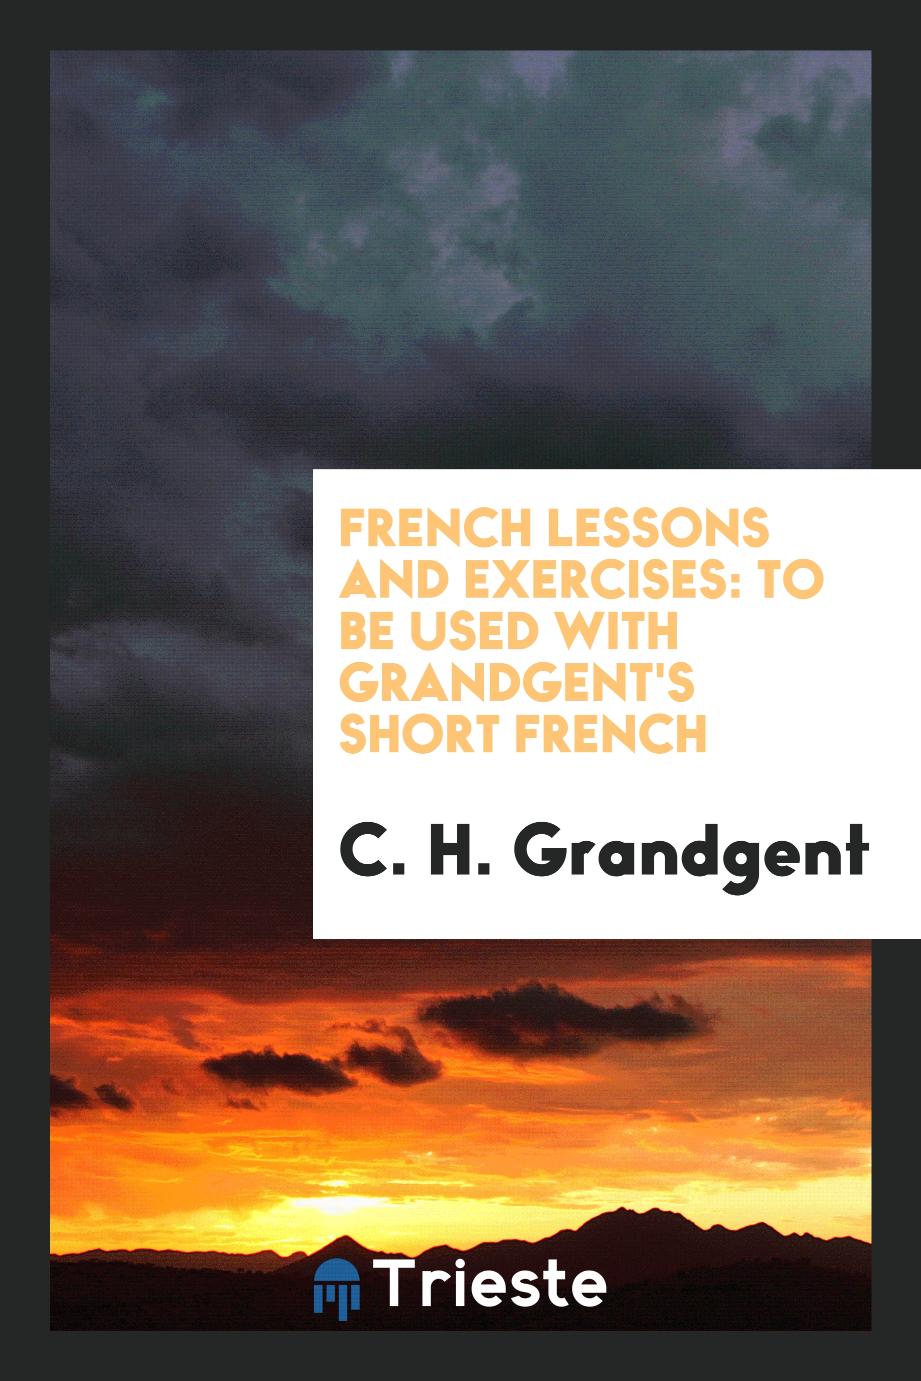 French Lessons and Exercises: to be used with Grandgent's Short French